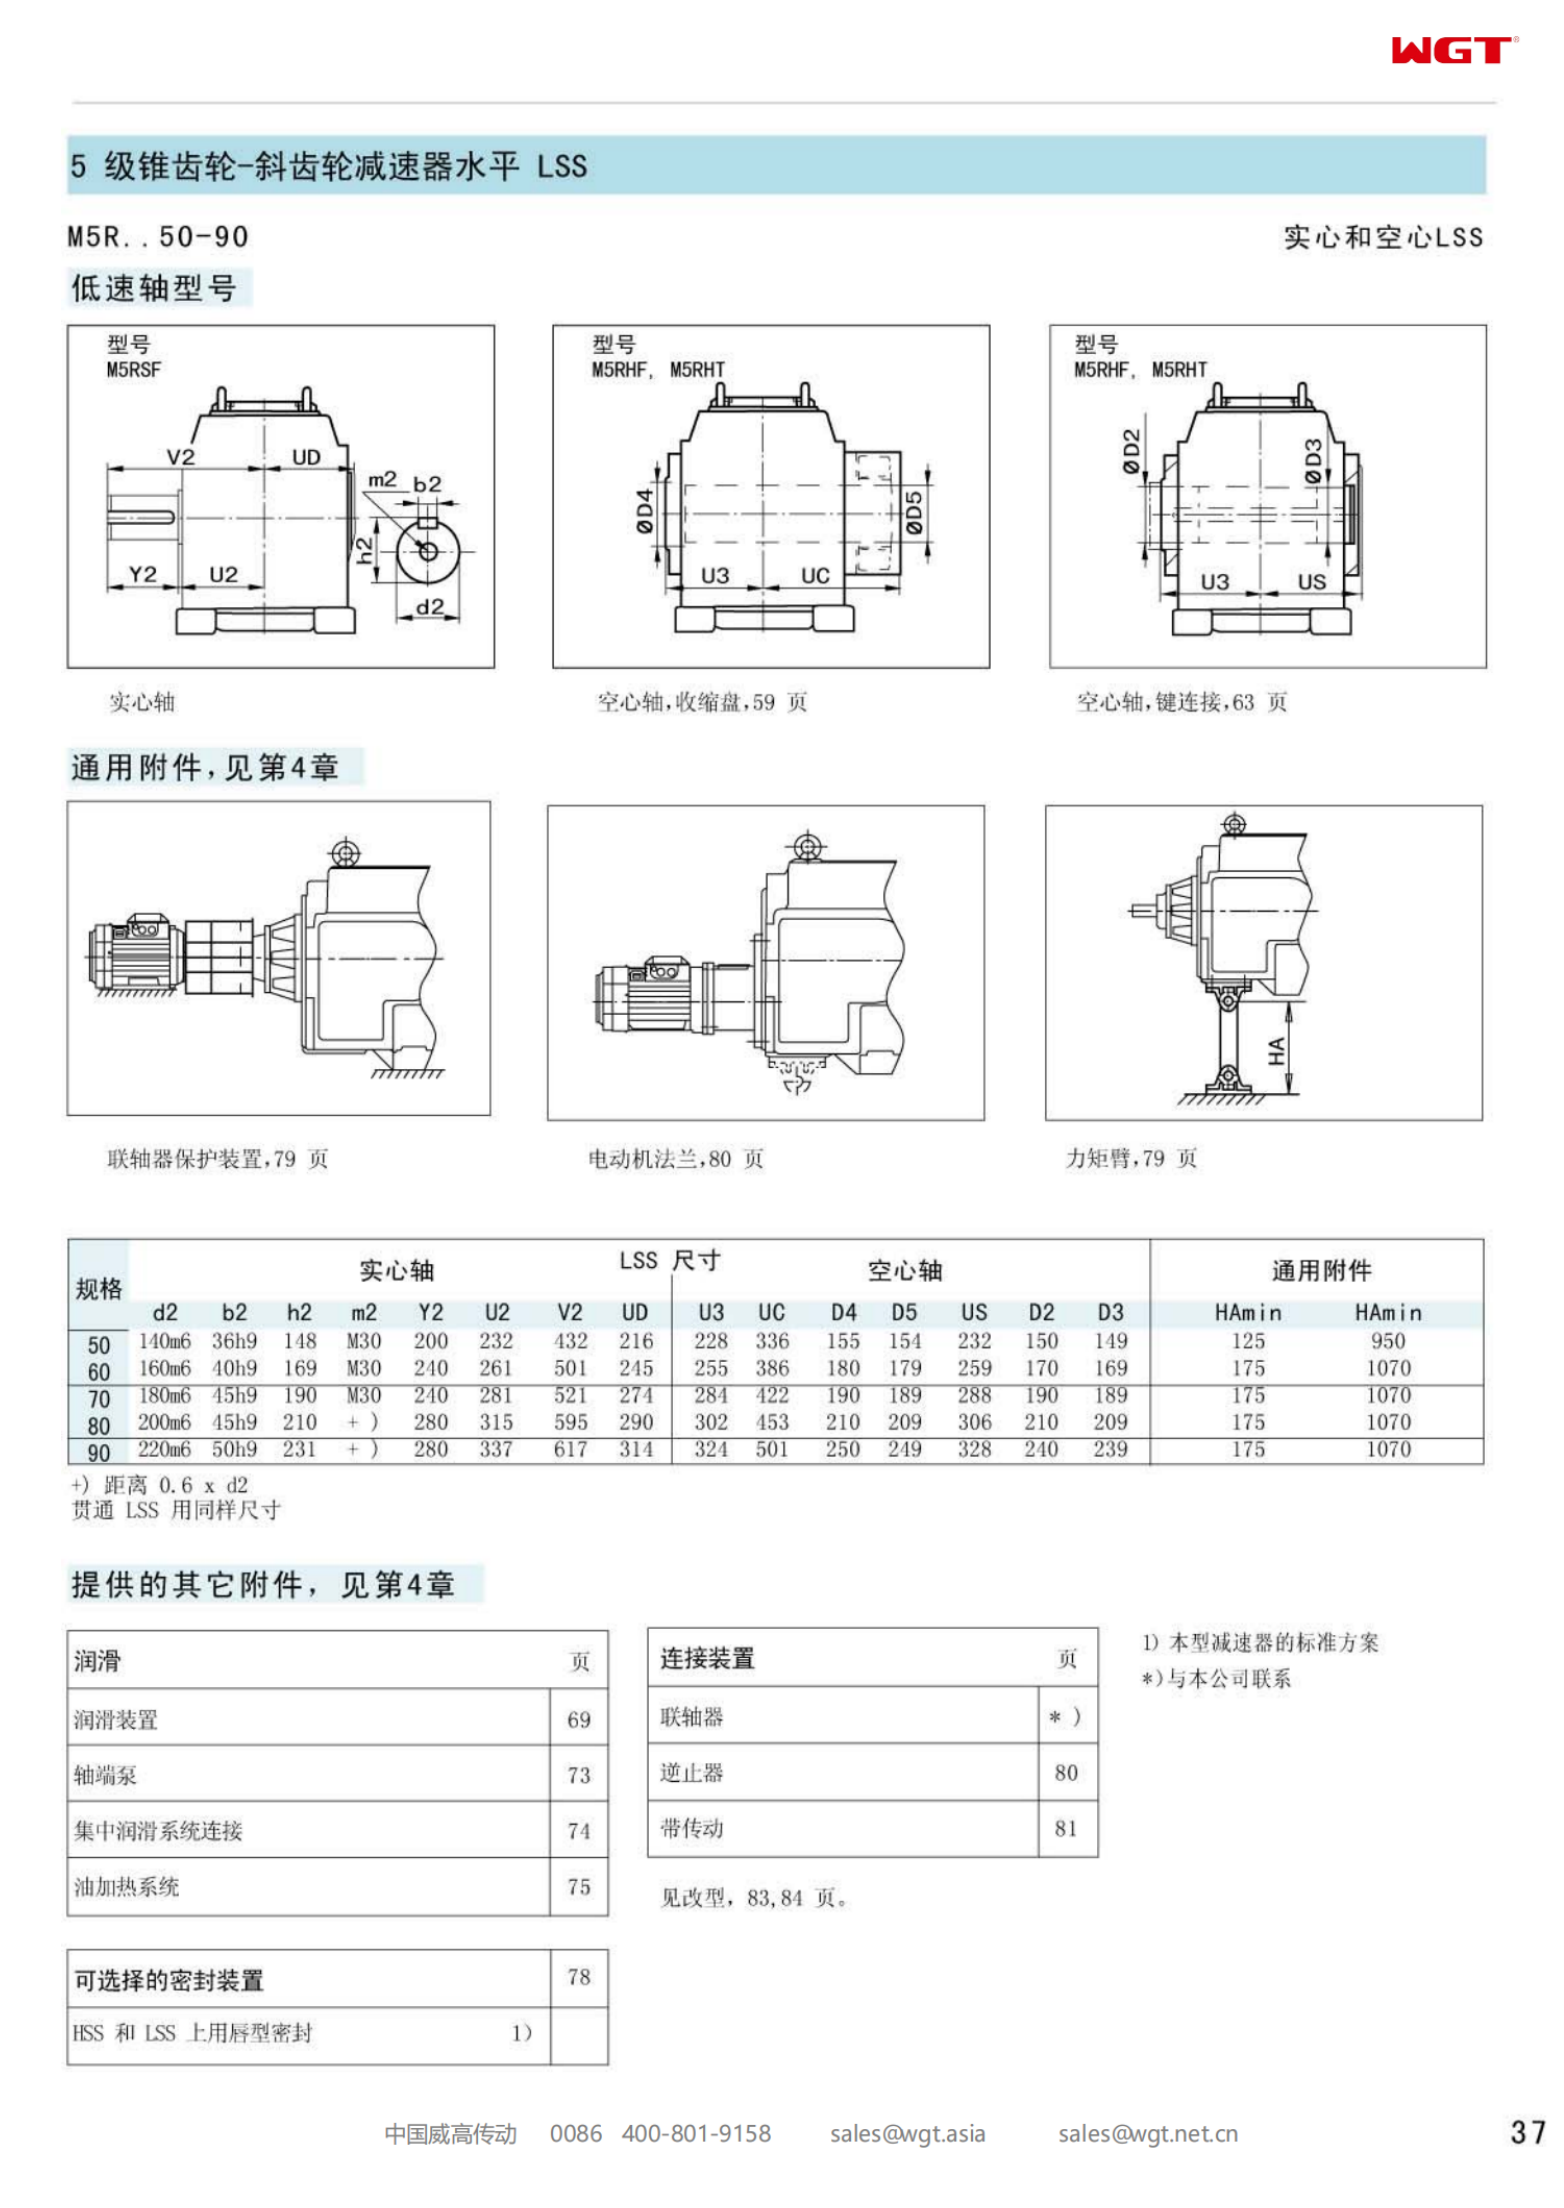 M5RHT90 Replace_SEW_M_Series Gearbox